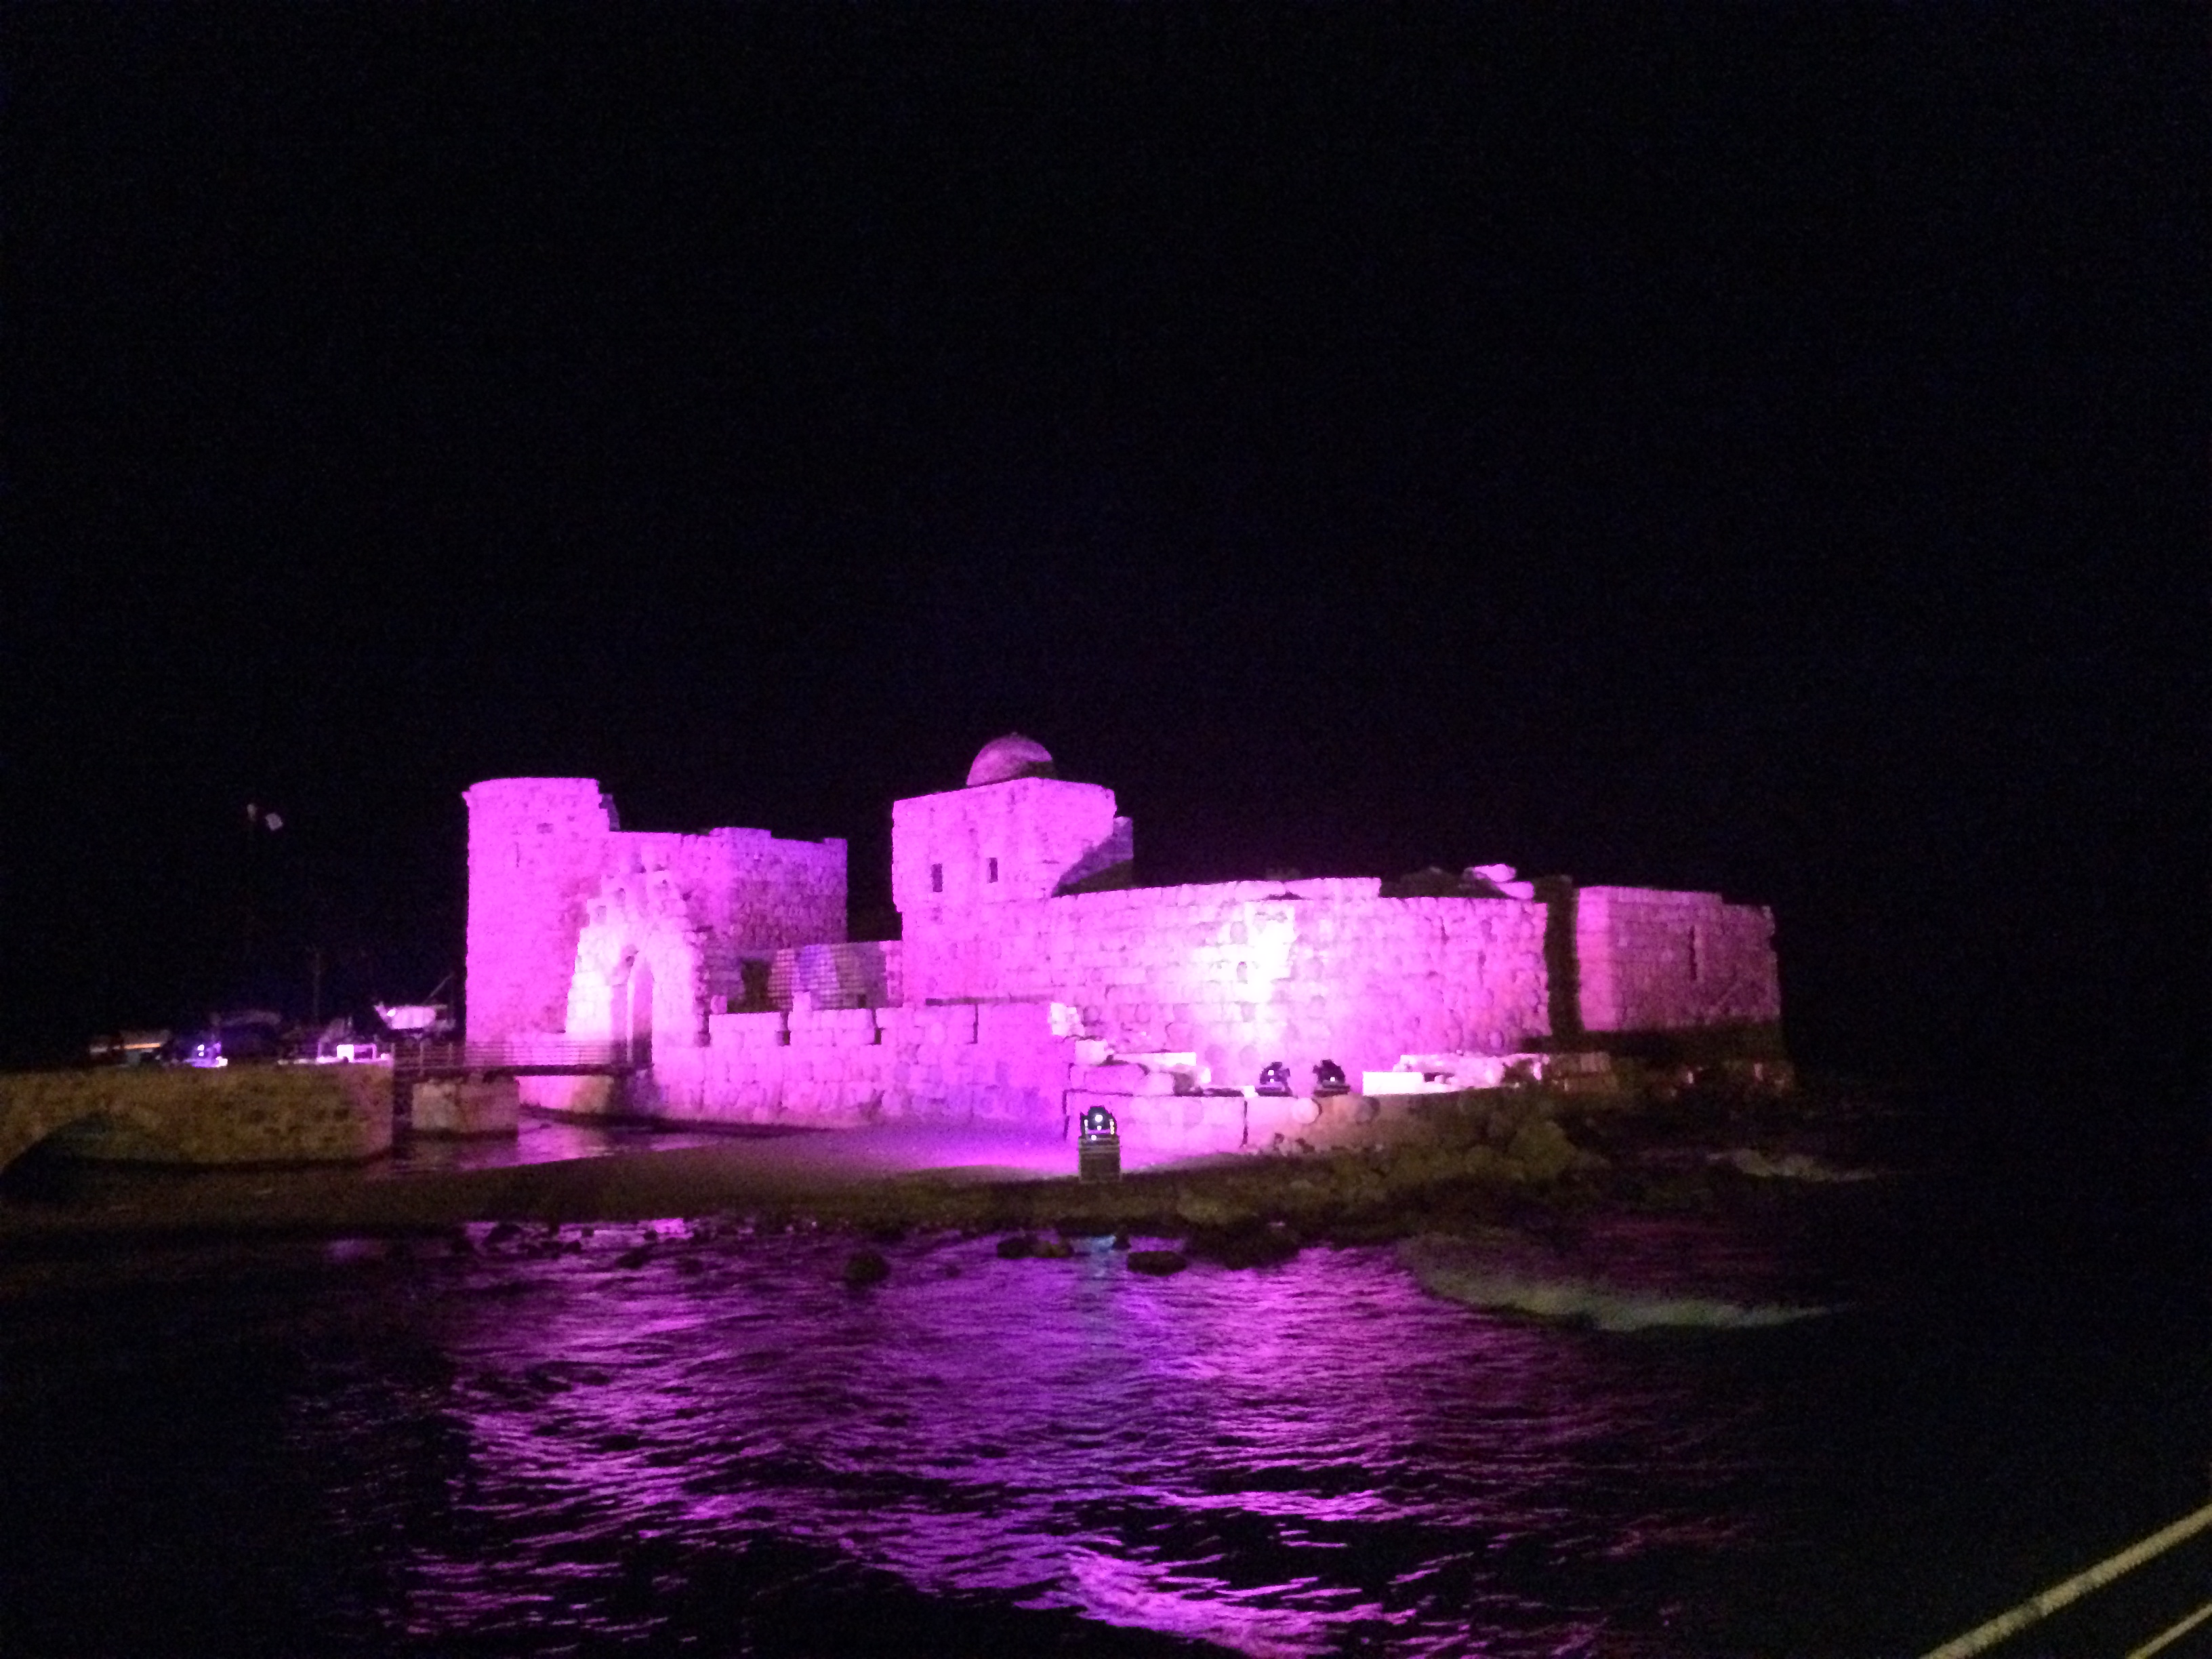 Sidon Sea Castle lit up with pink lights